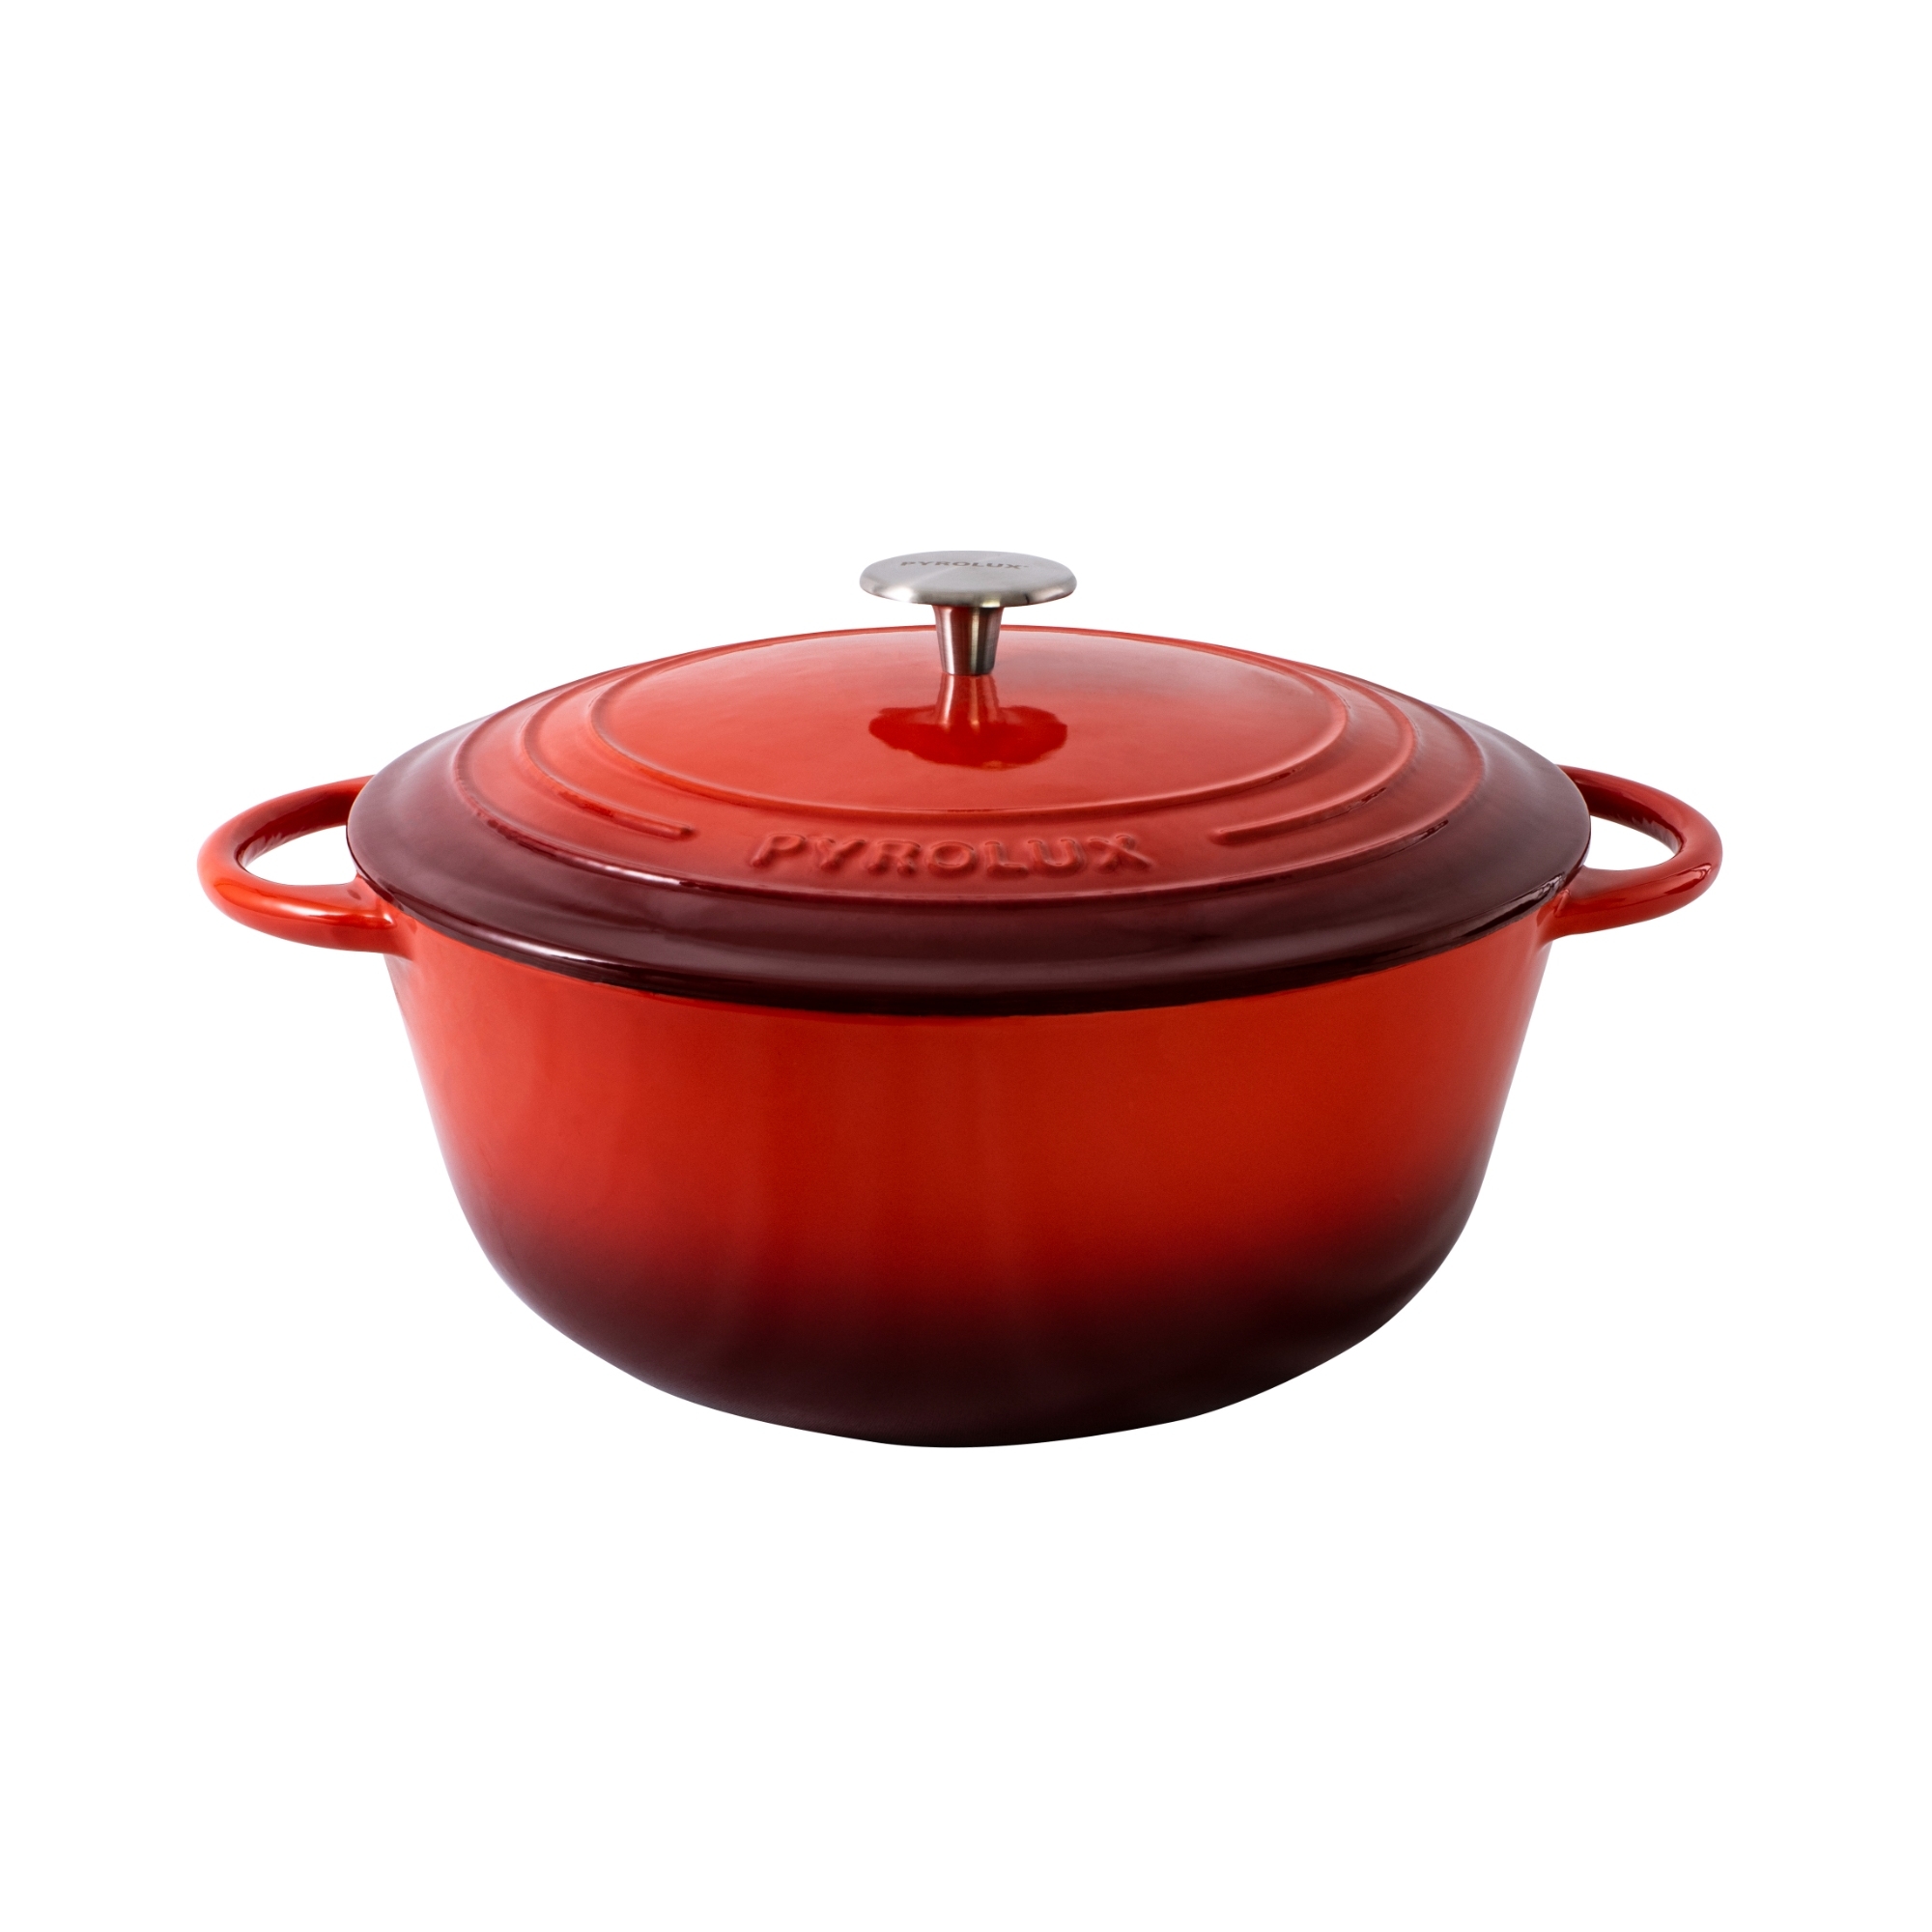 Pyrolux Pyrochef Enamelled Cast Iron Casserole 28cm - 6L Red Image 2